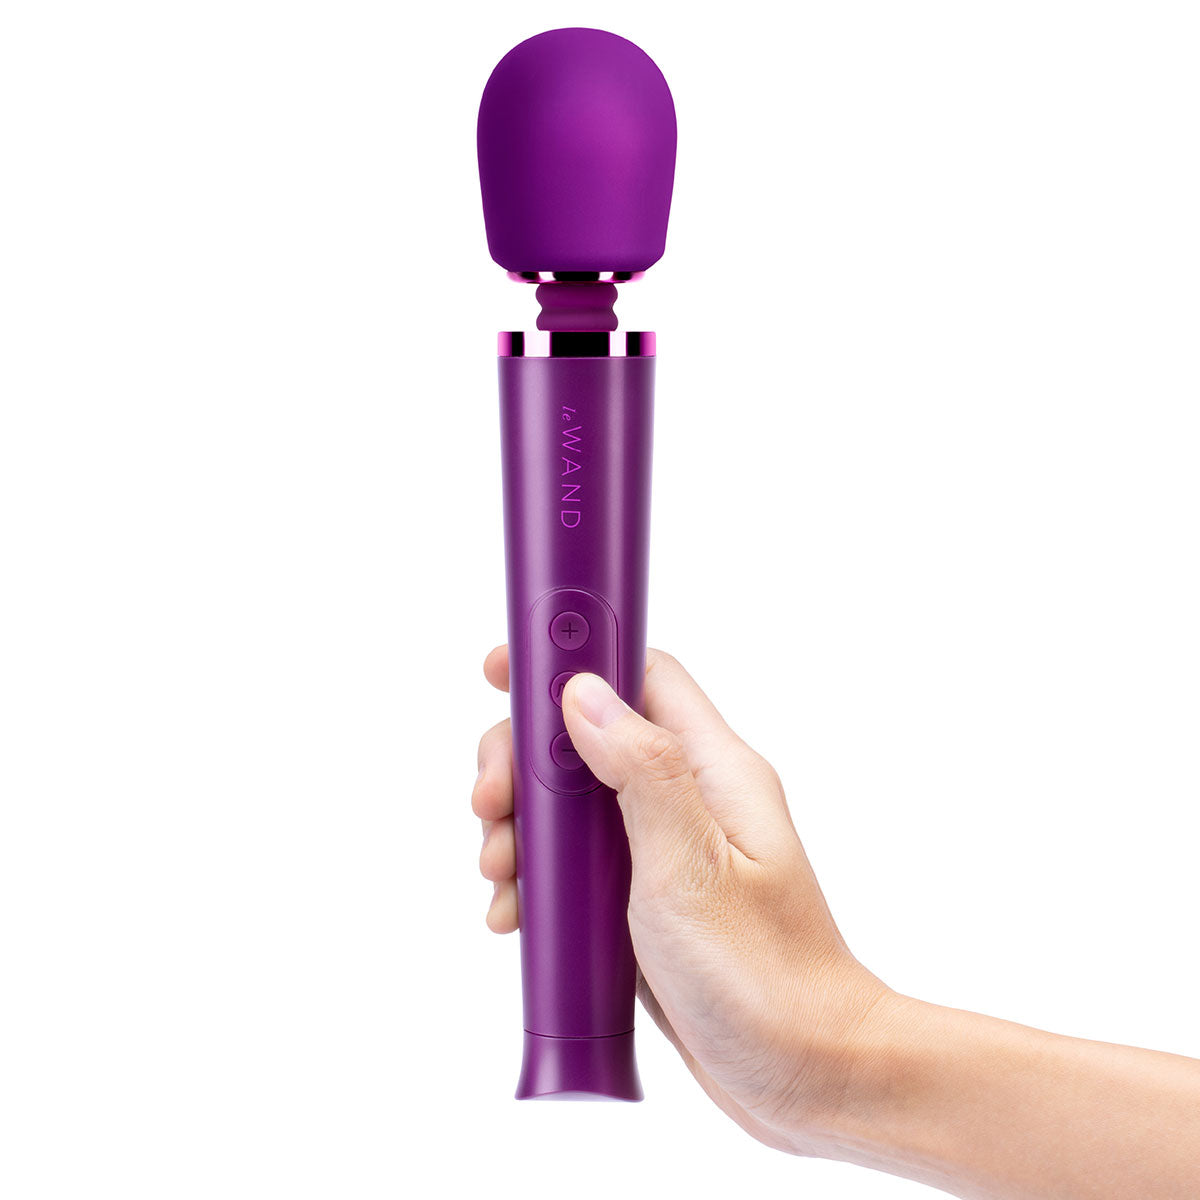 Le Wand Petite Massager - Dark Cherry Intimates Adult Boutique